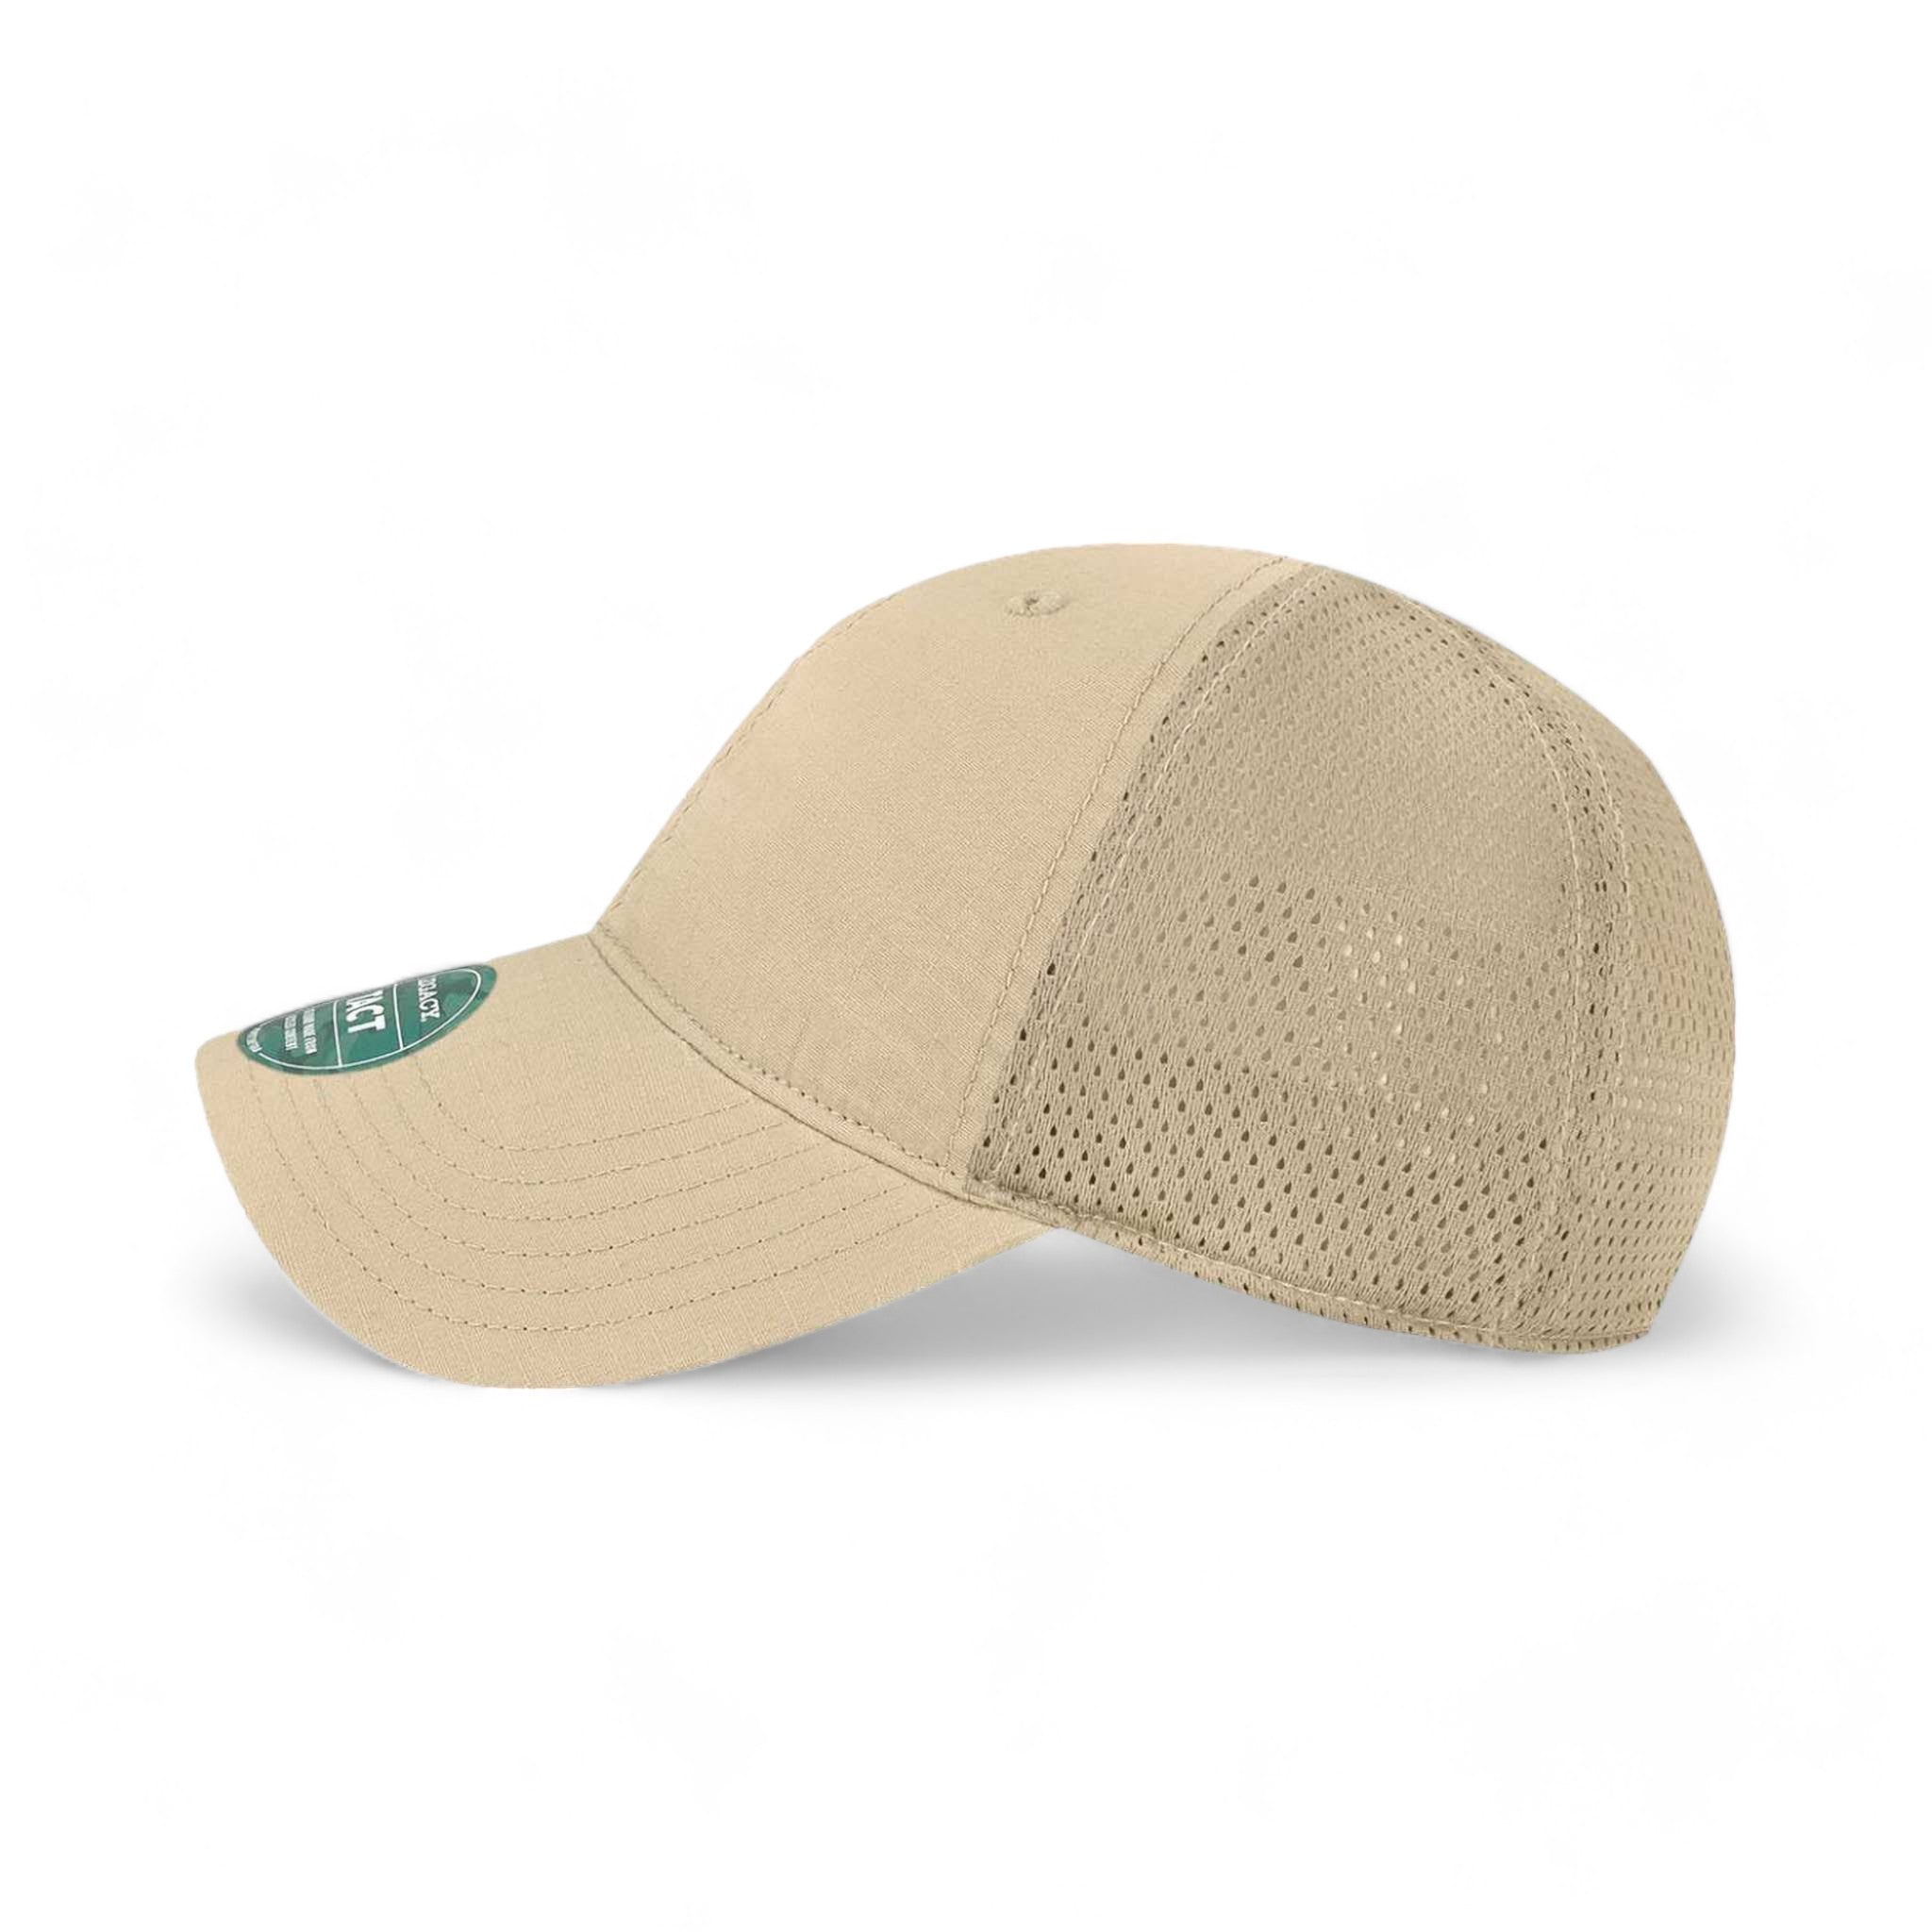 Side view of LEGACY TACT custom hat in khaki and khaki